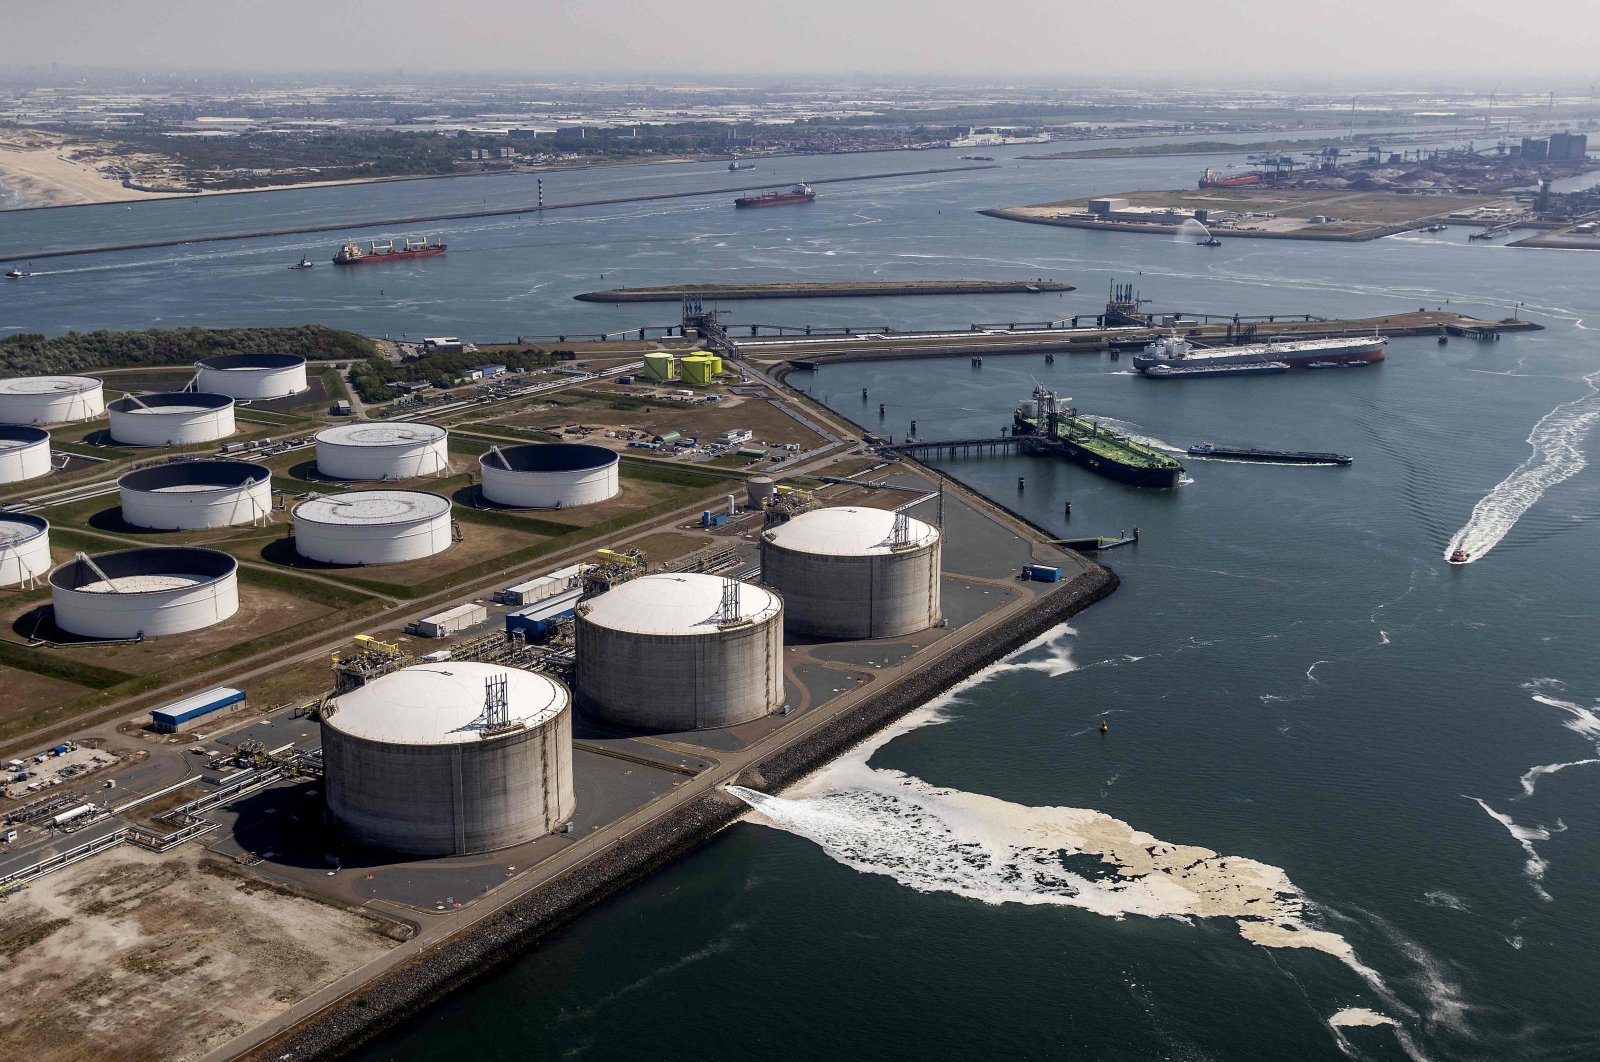 This aerial view shows the liquified natural gas (LNG) terminal on the Maasvlakte in Rotterdam, the Netherlands, May 6, 2022. (AFP Photo)